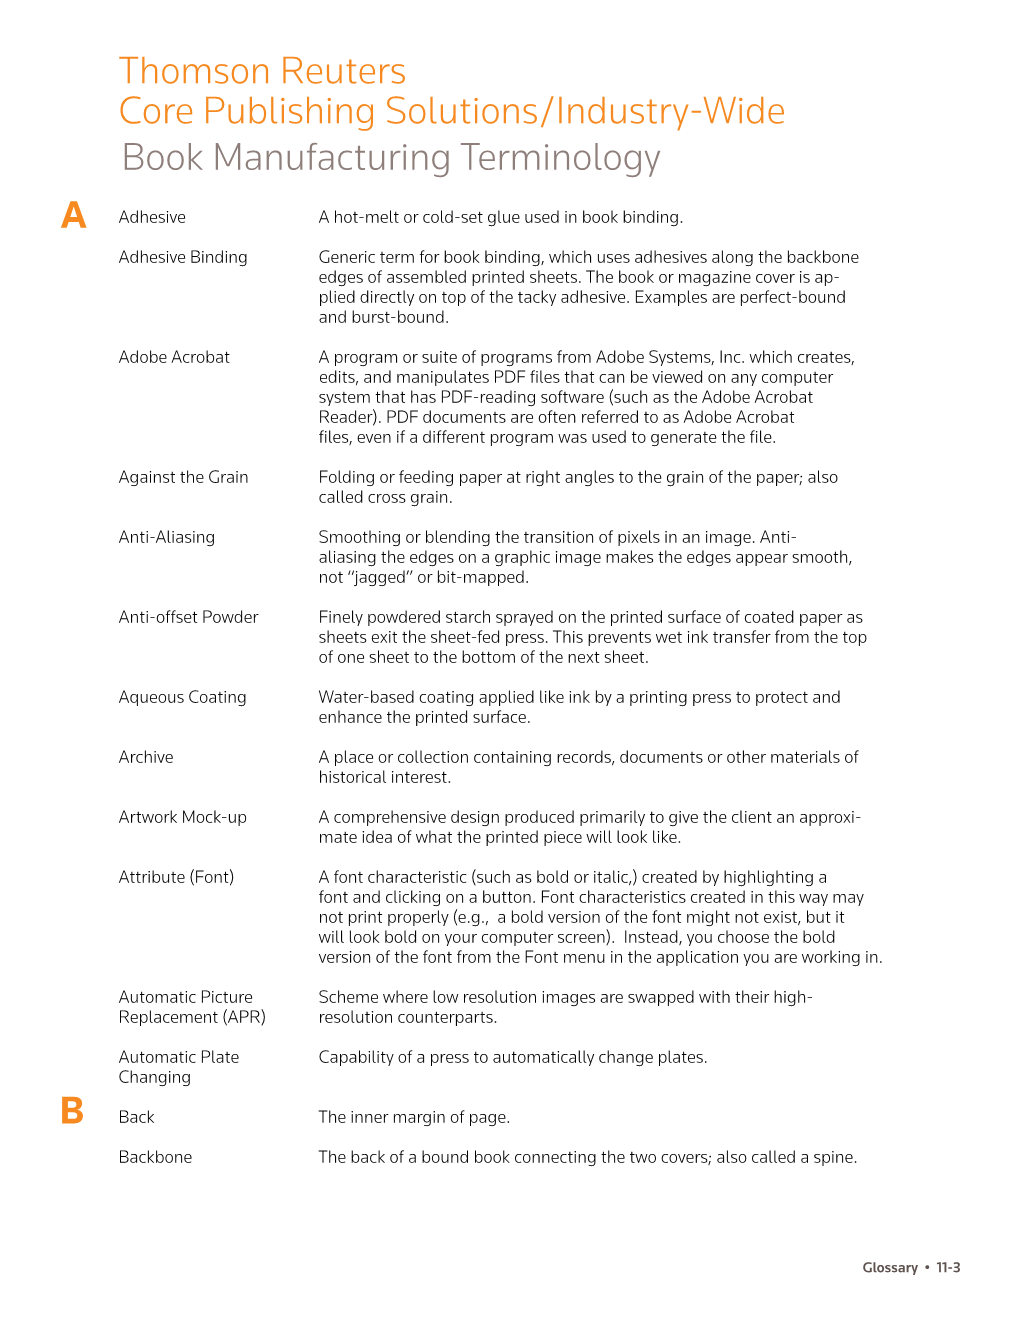 Thomson Reuters Core Publishing Solutions/Industry-Wide Book Manufacturing Terminology